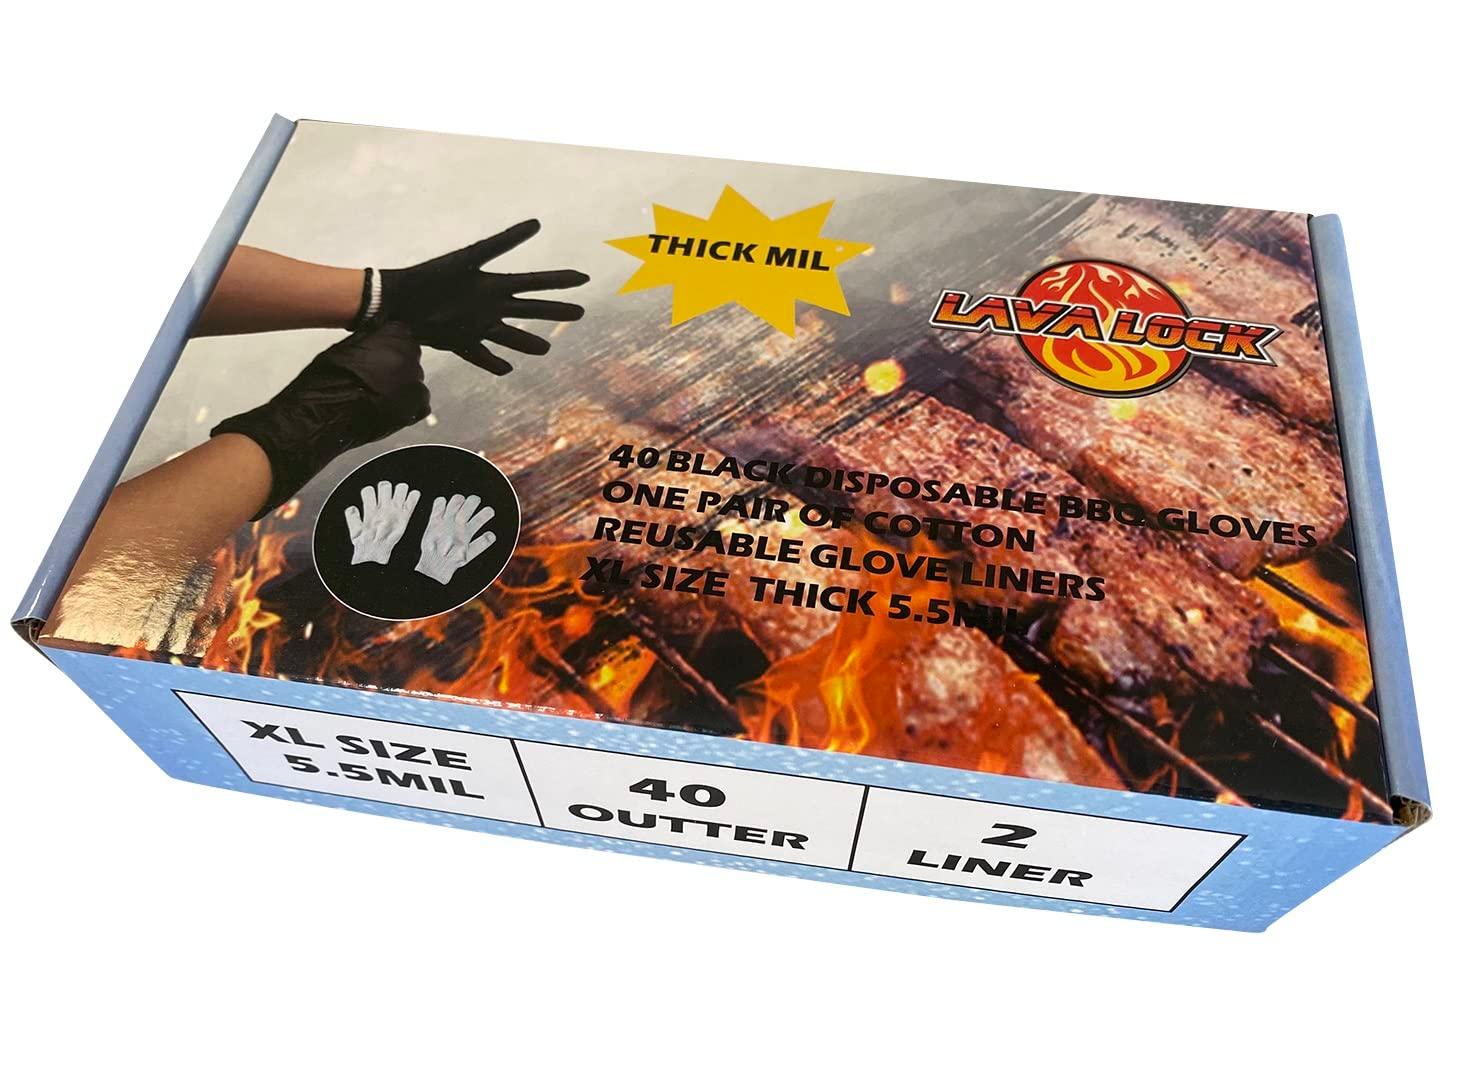 LavaLock Heavy Duty Thick 5.5 Mil Black Disposable Nitrile BBQ Gloves with 2 cotton liners for outdoor cooking grilling smokers and barbecue competition, chef or kitchen use (40, Extra-Large) - CookCave